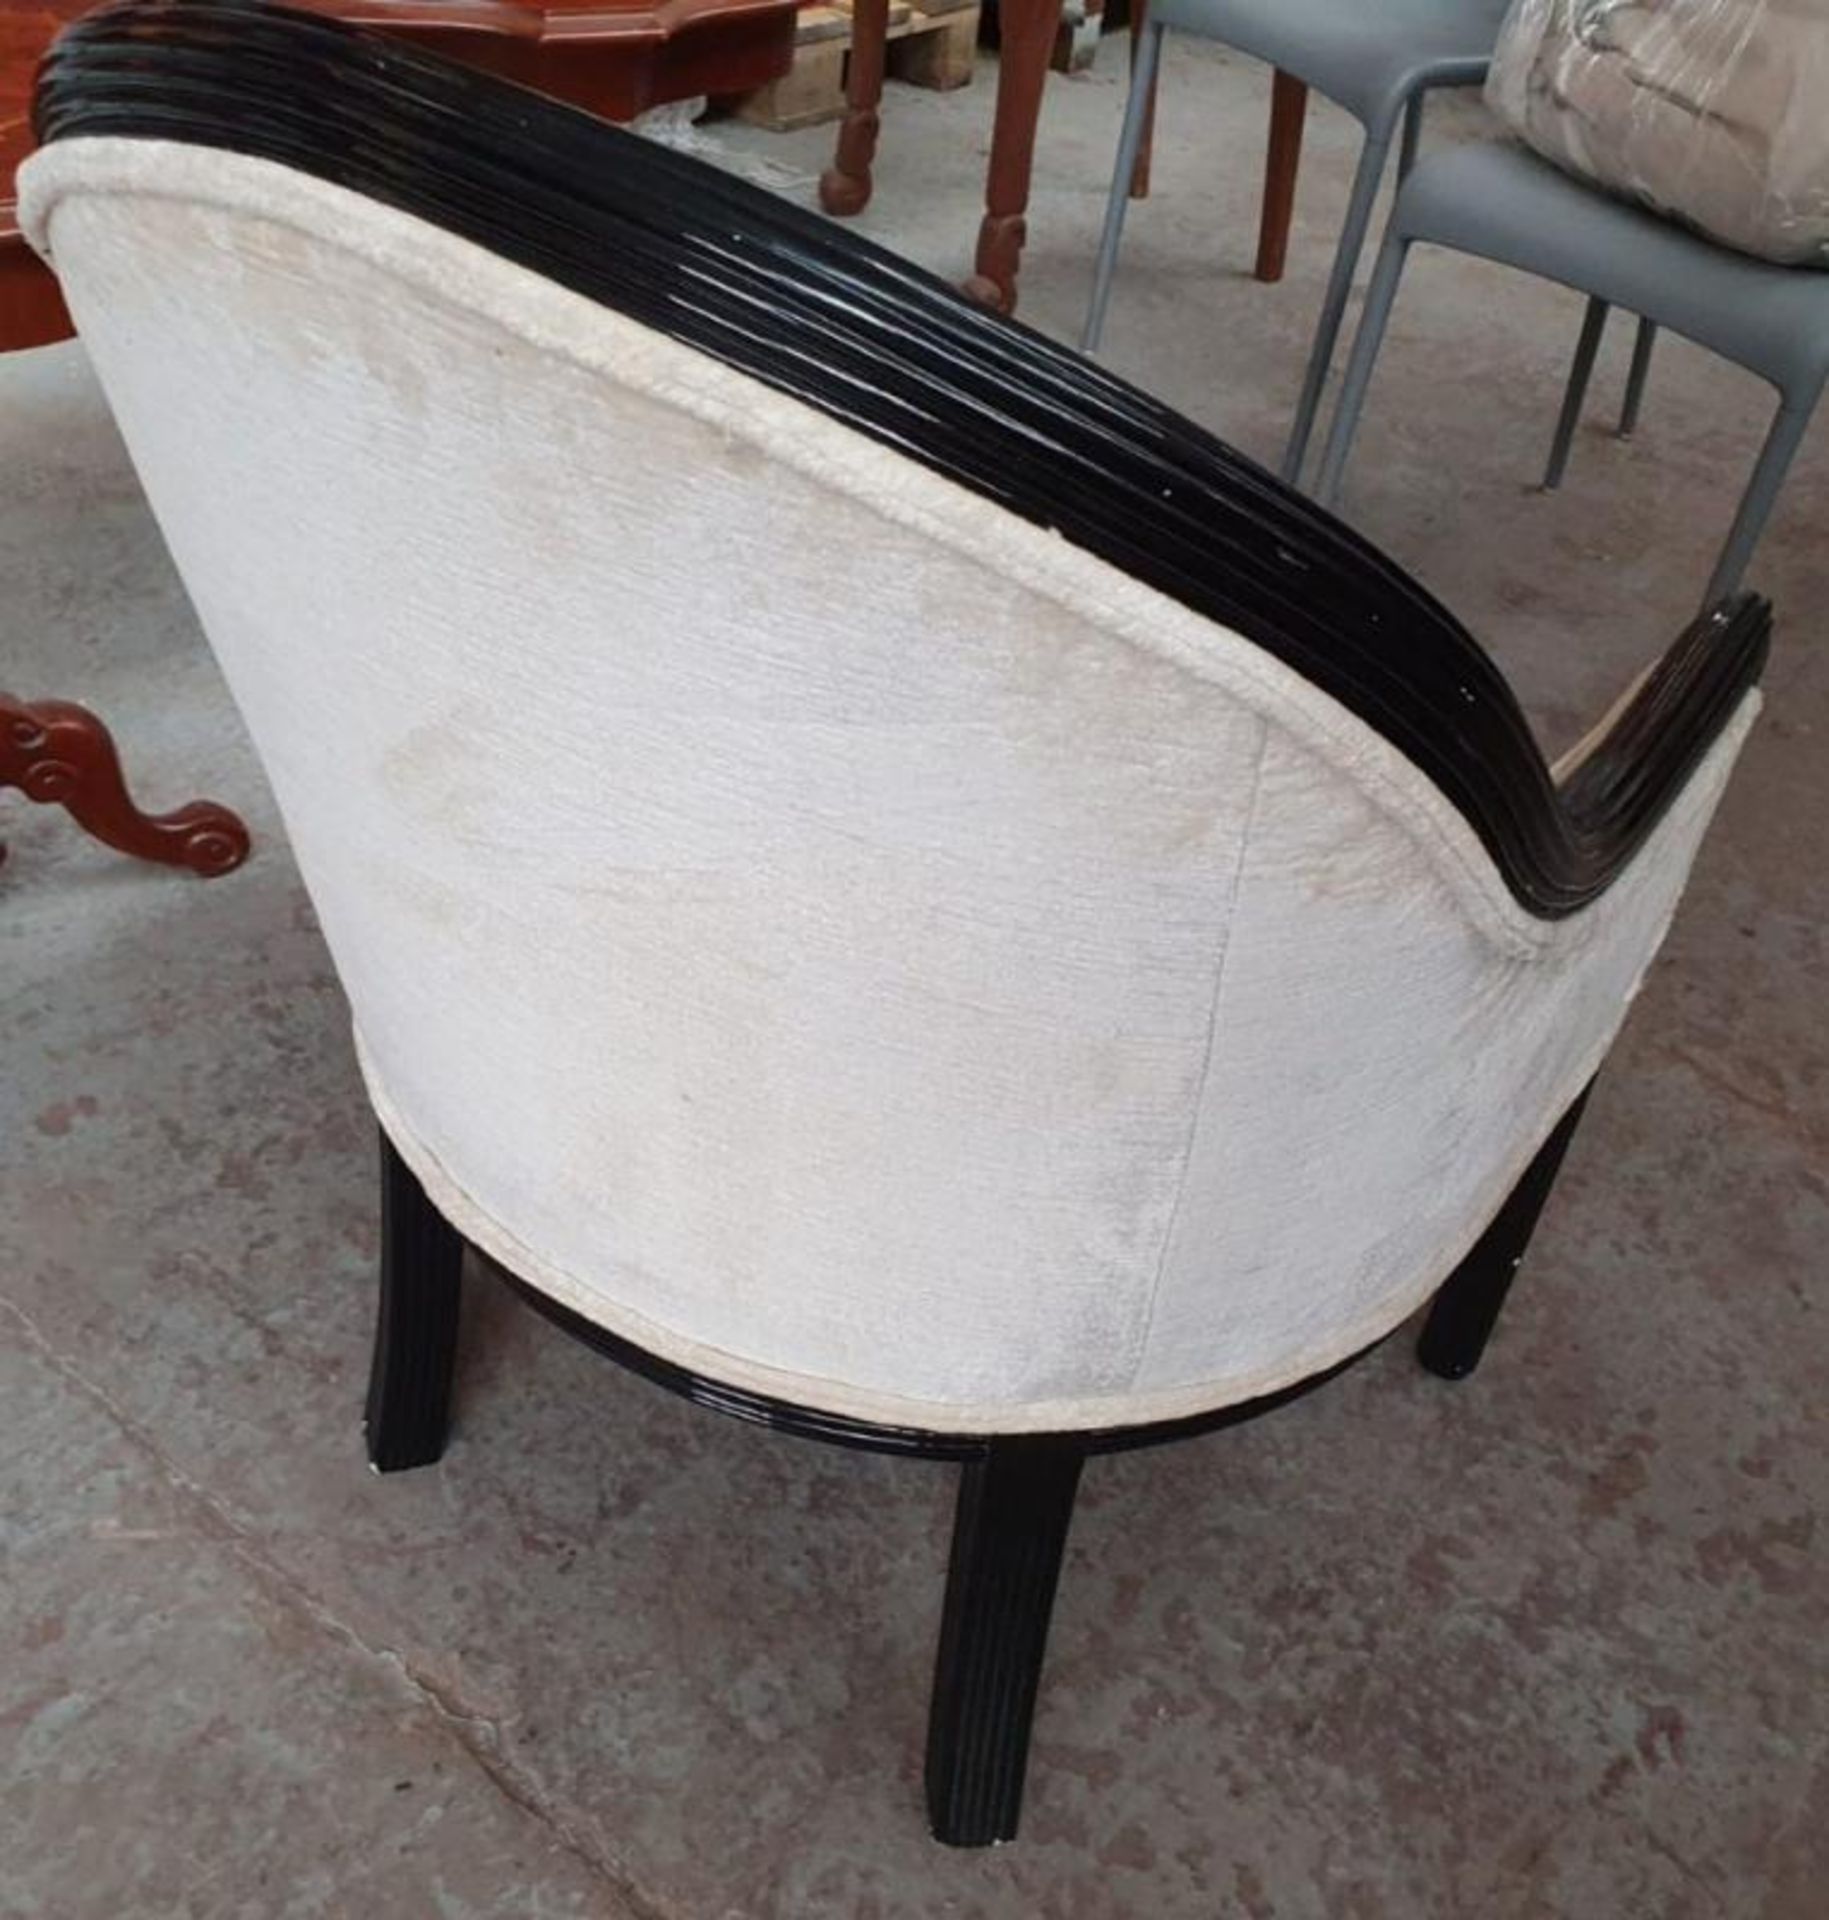 1 x Attractive Curved Armchair In Cream - Pre-owned In Good Condition - £1 Start, No Reserve - Image 7 of 10